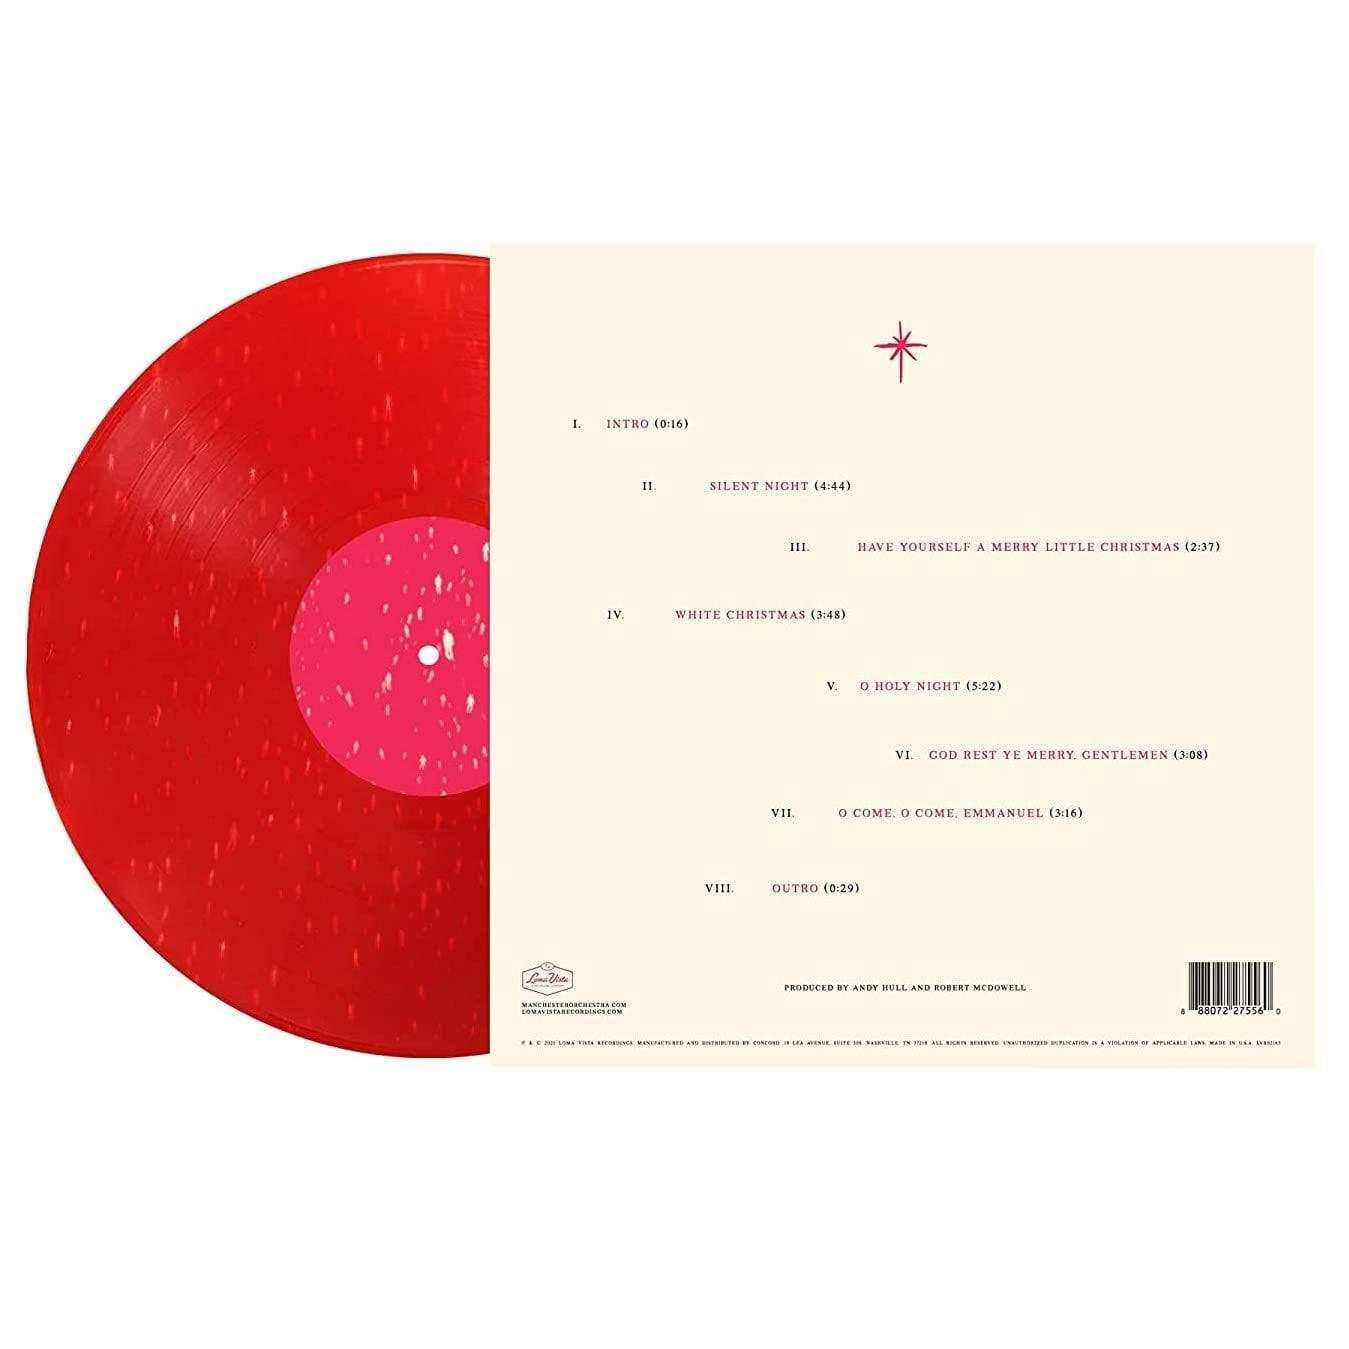 Manchester Orchestra - Christmas Songs Vol. 1 (Limited Edition, Red Vinyl) (LP) - Joco Records